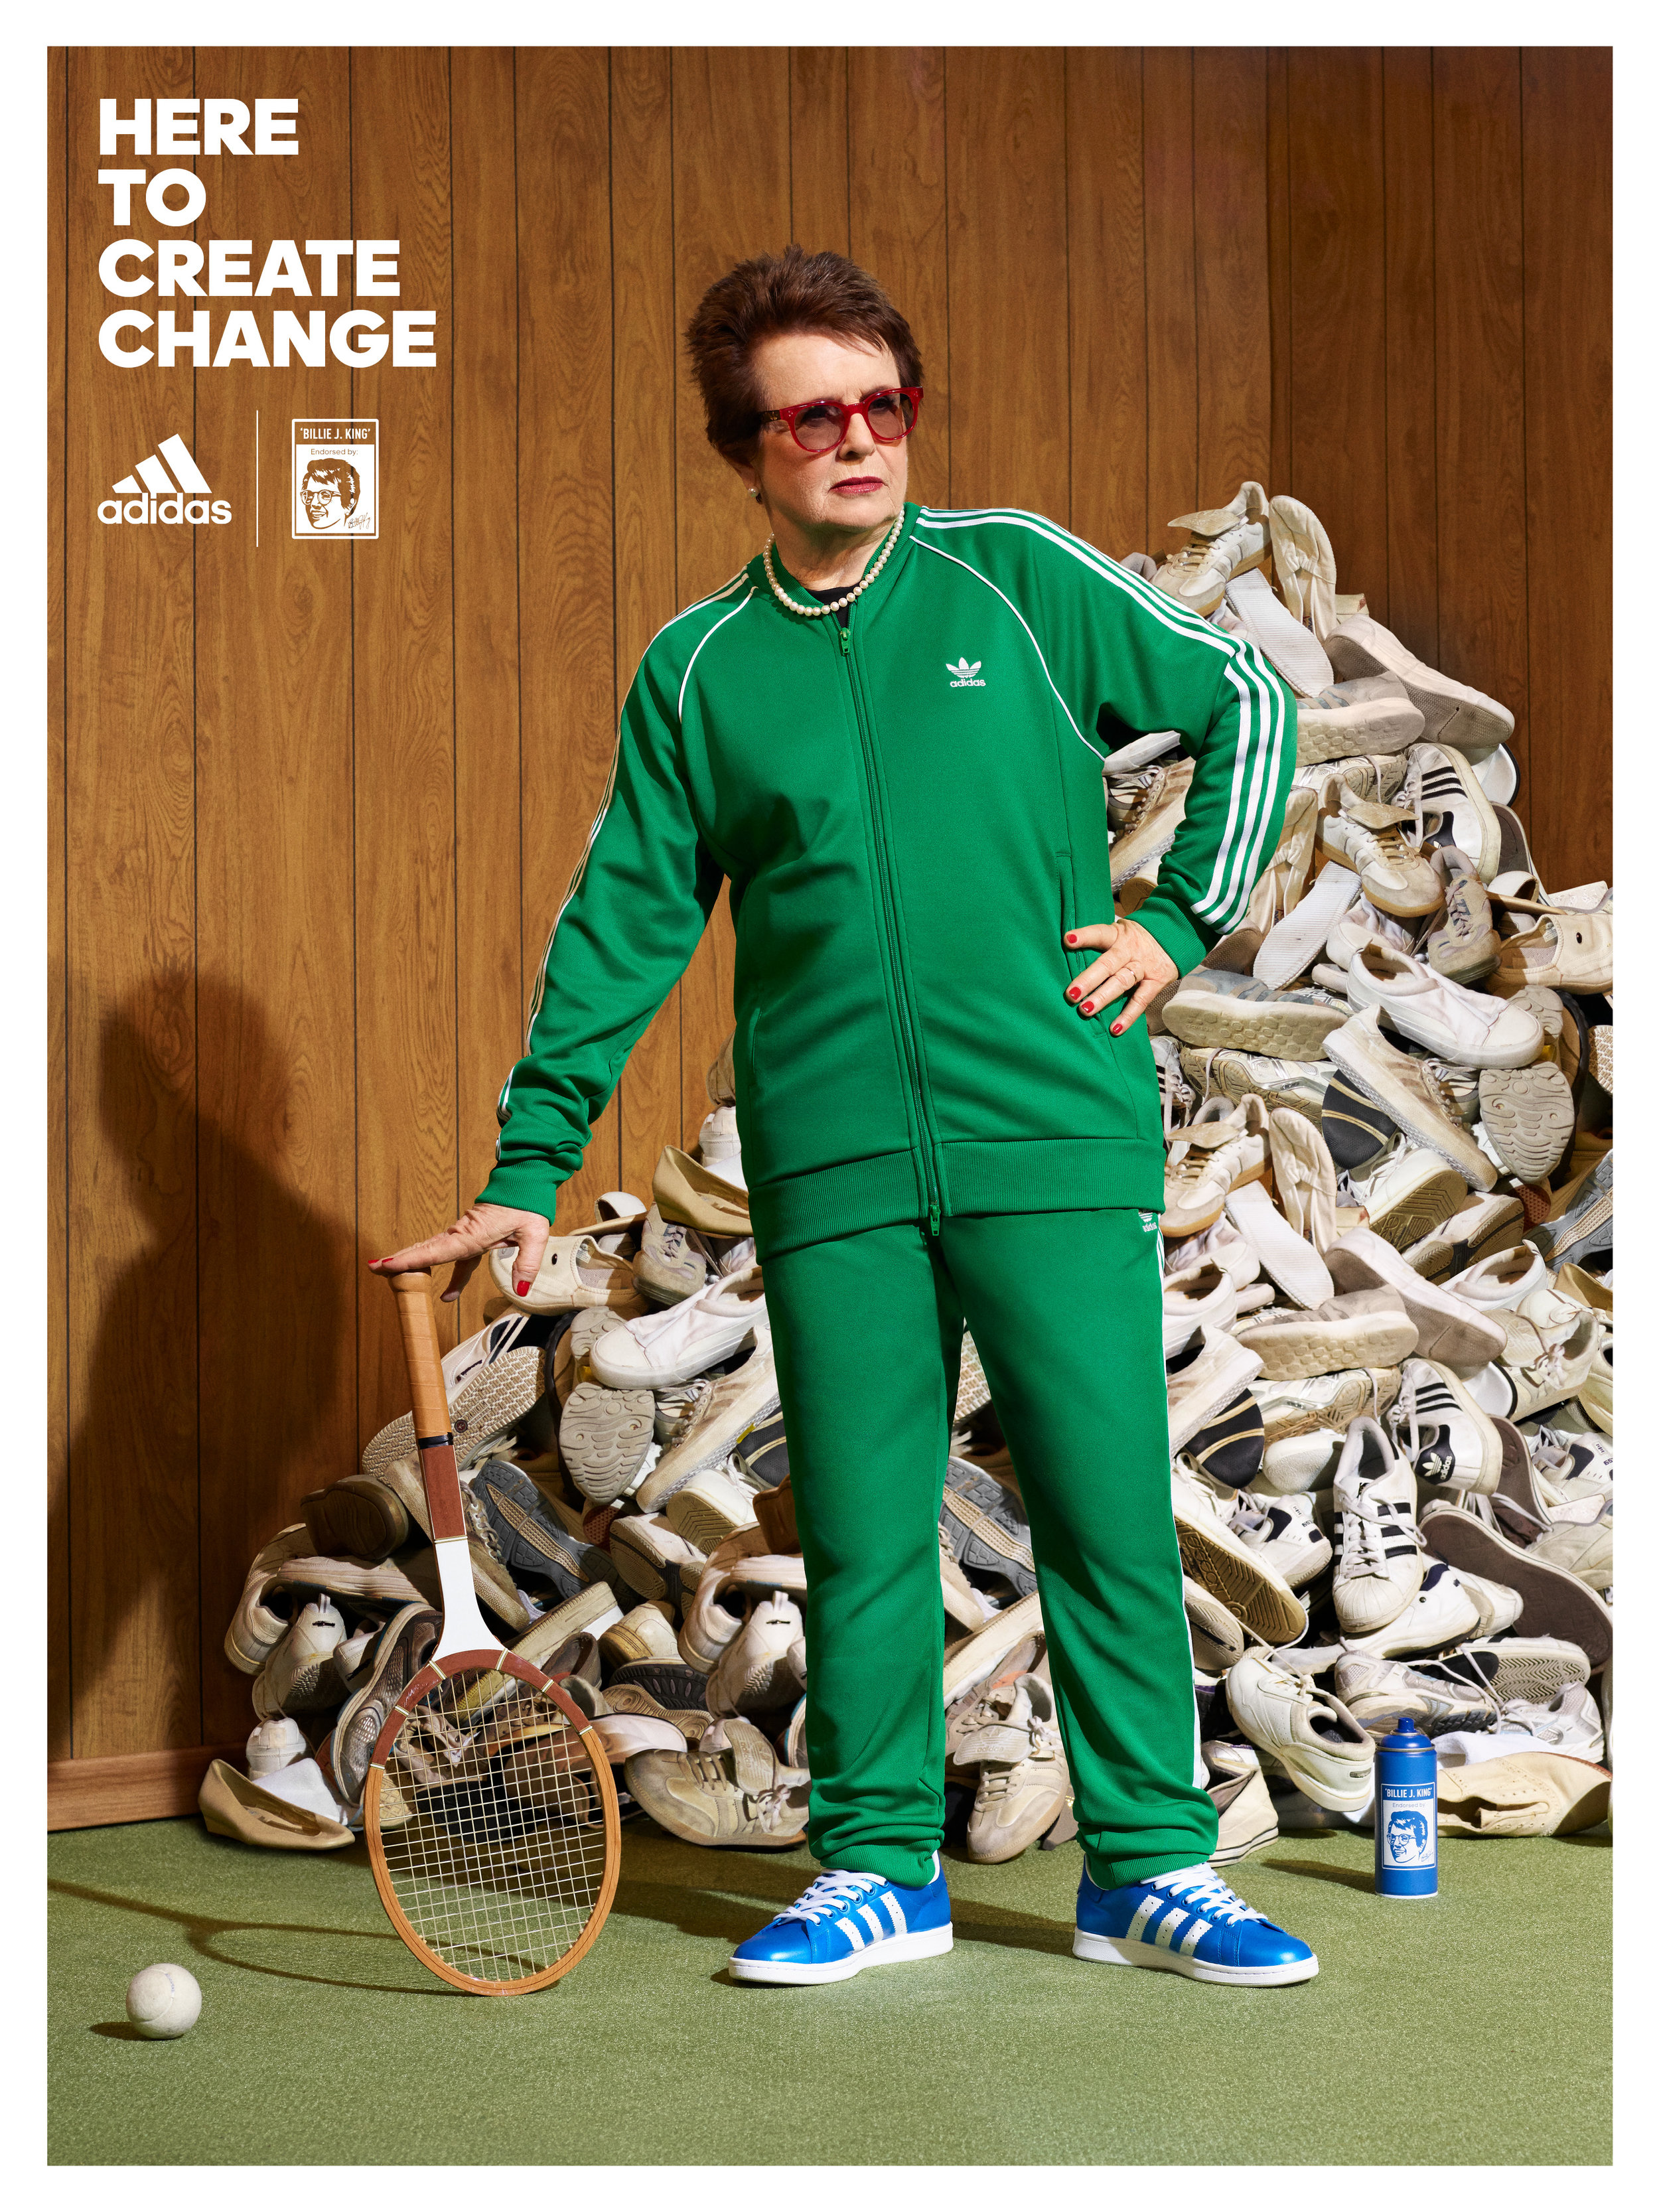 Adidas - Billie Jean King Your Shoes 